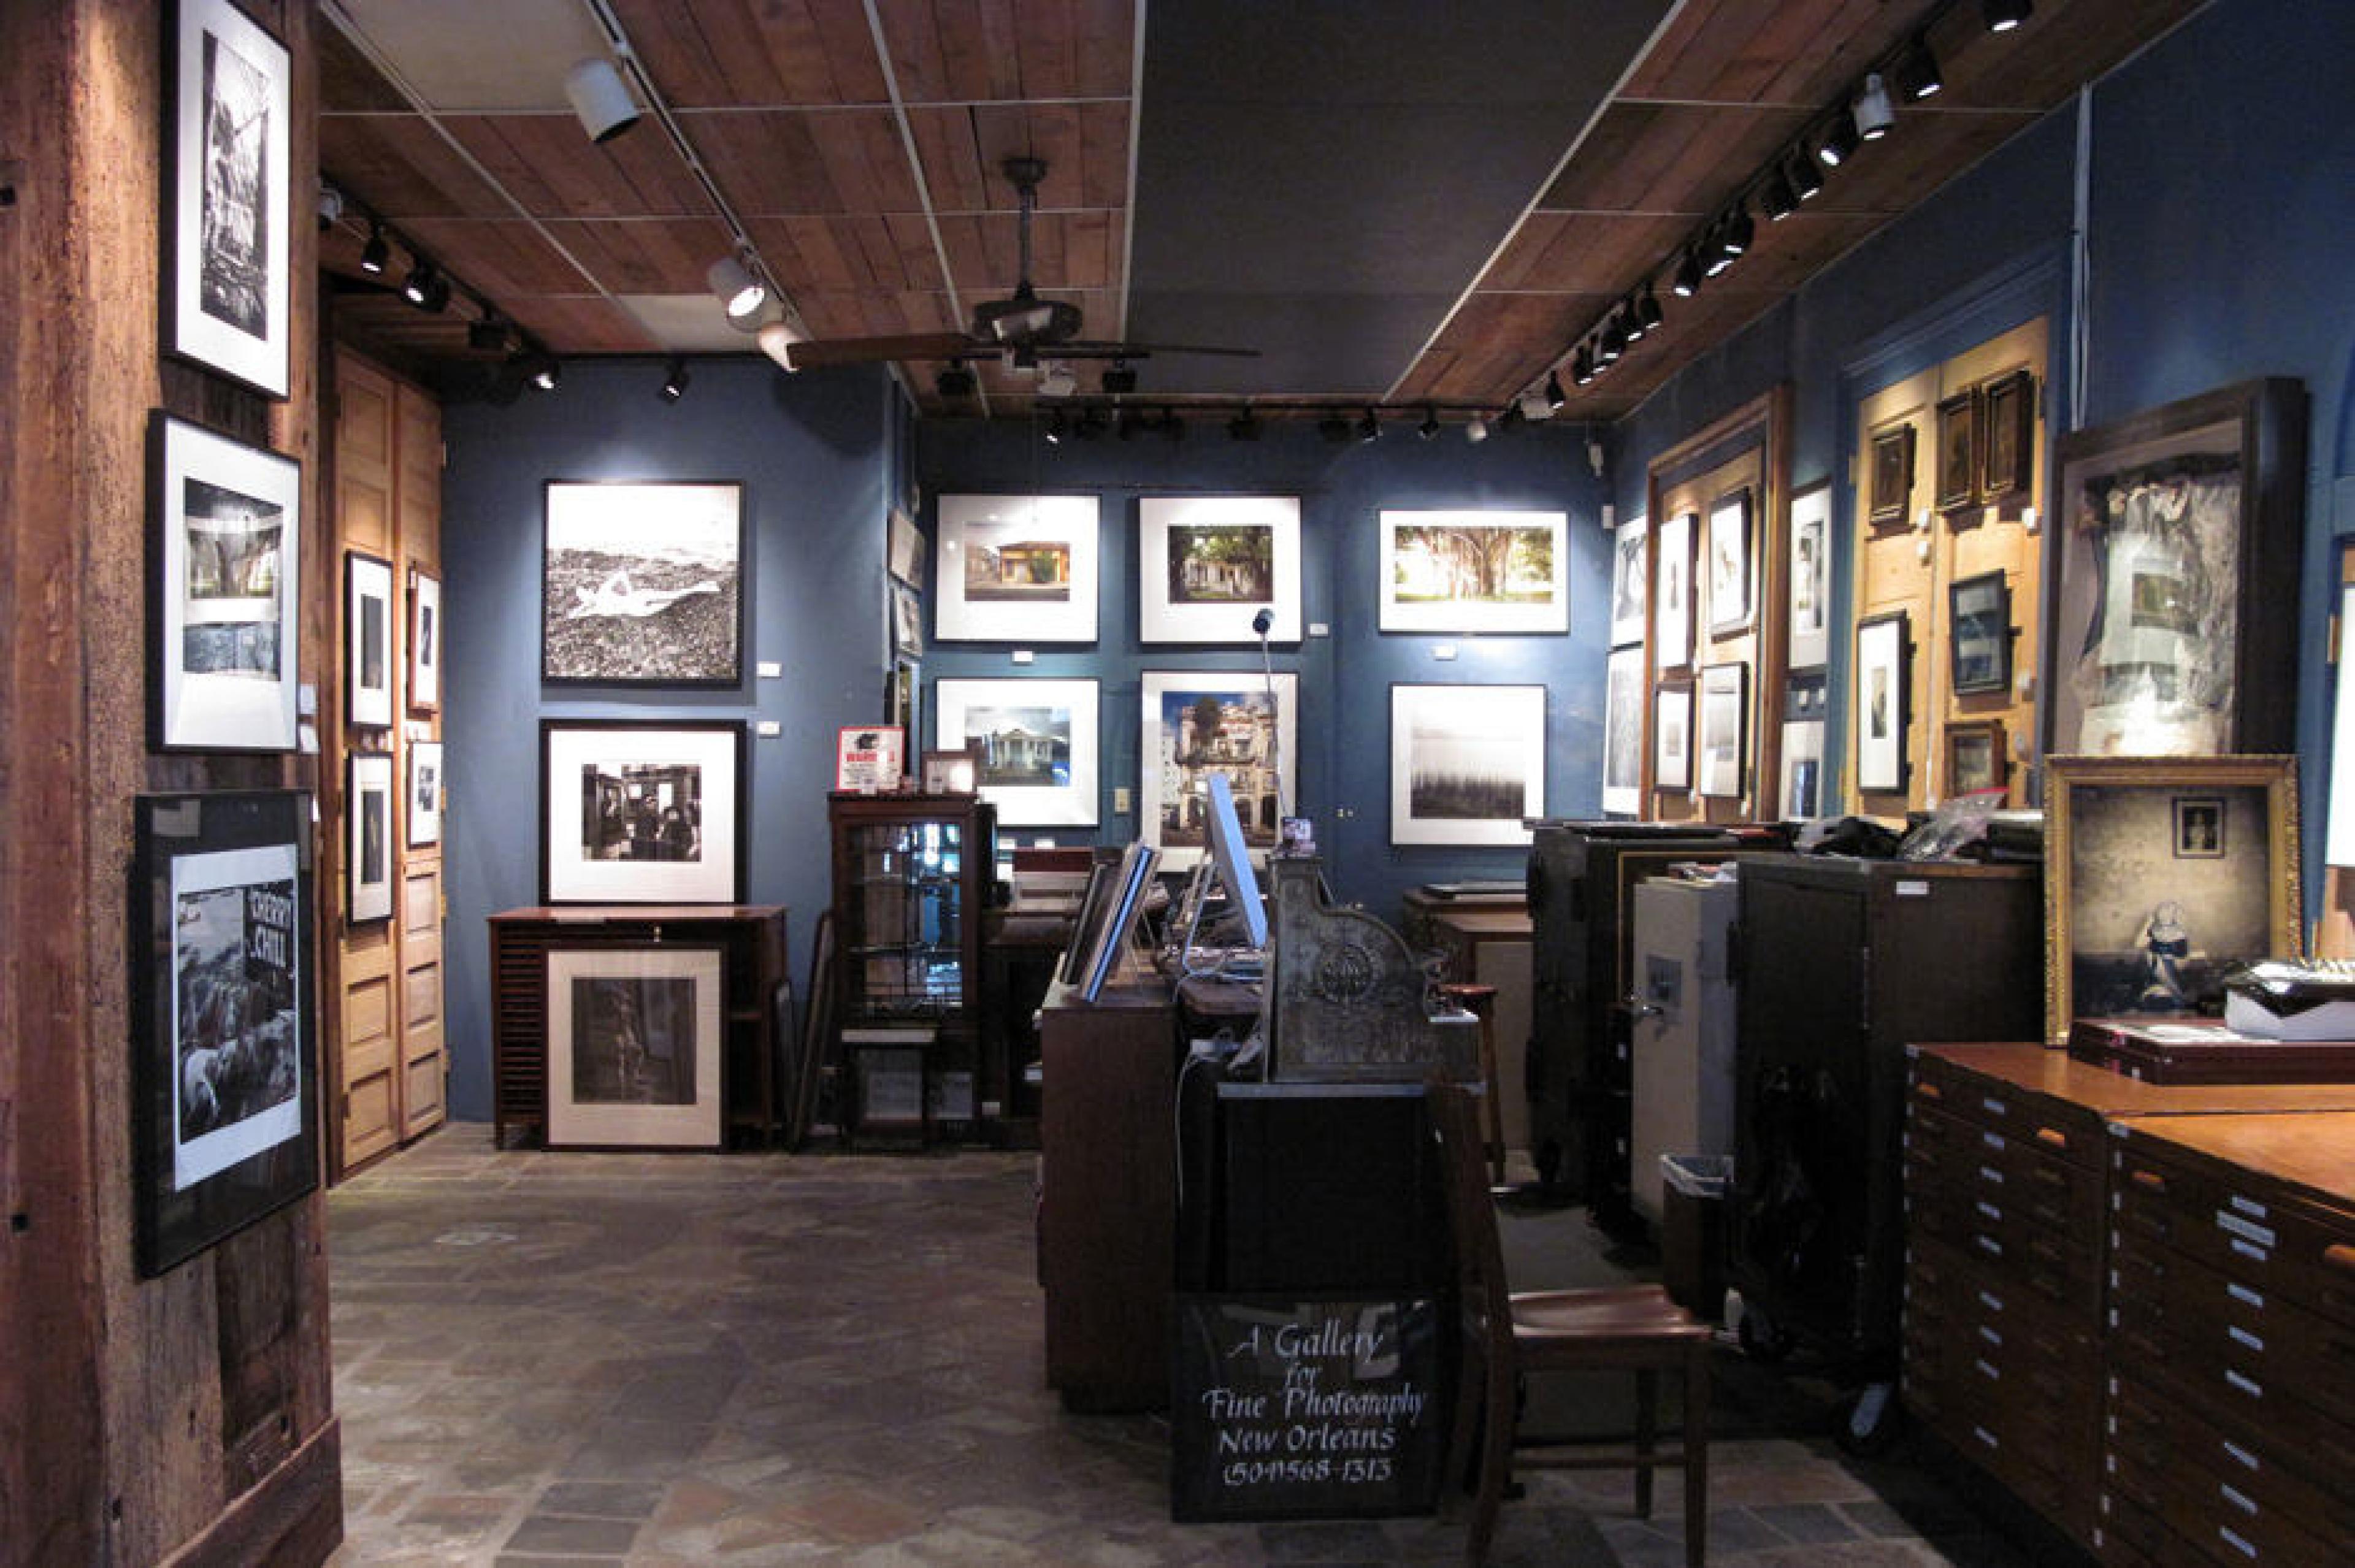 Interior View - A Gallery for Fine Photography, New Orleans, American South